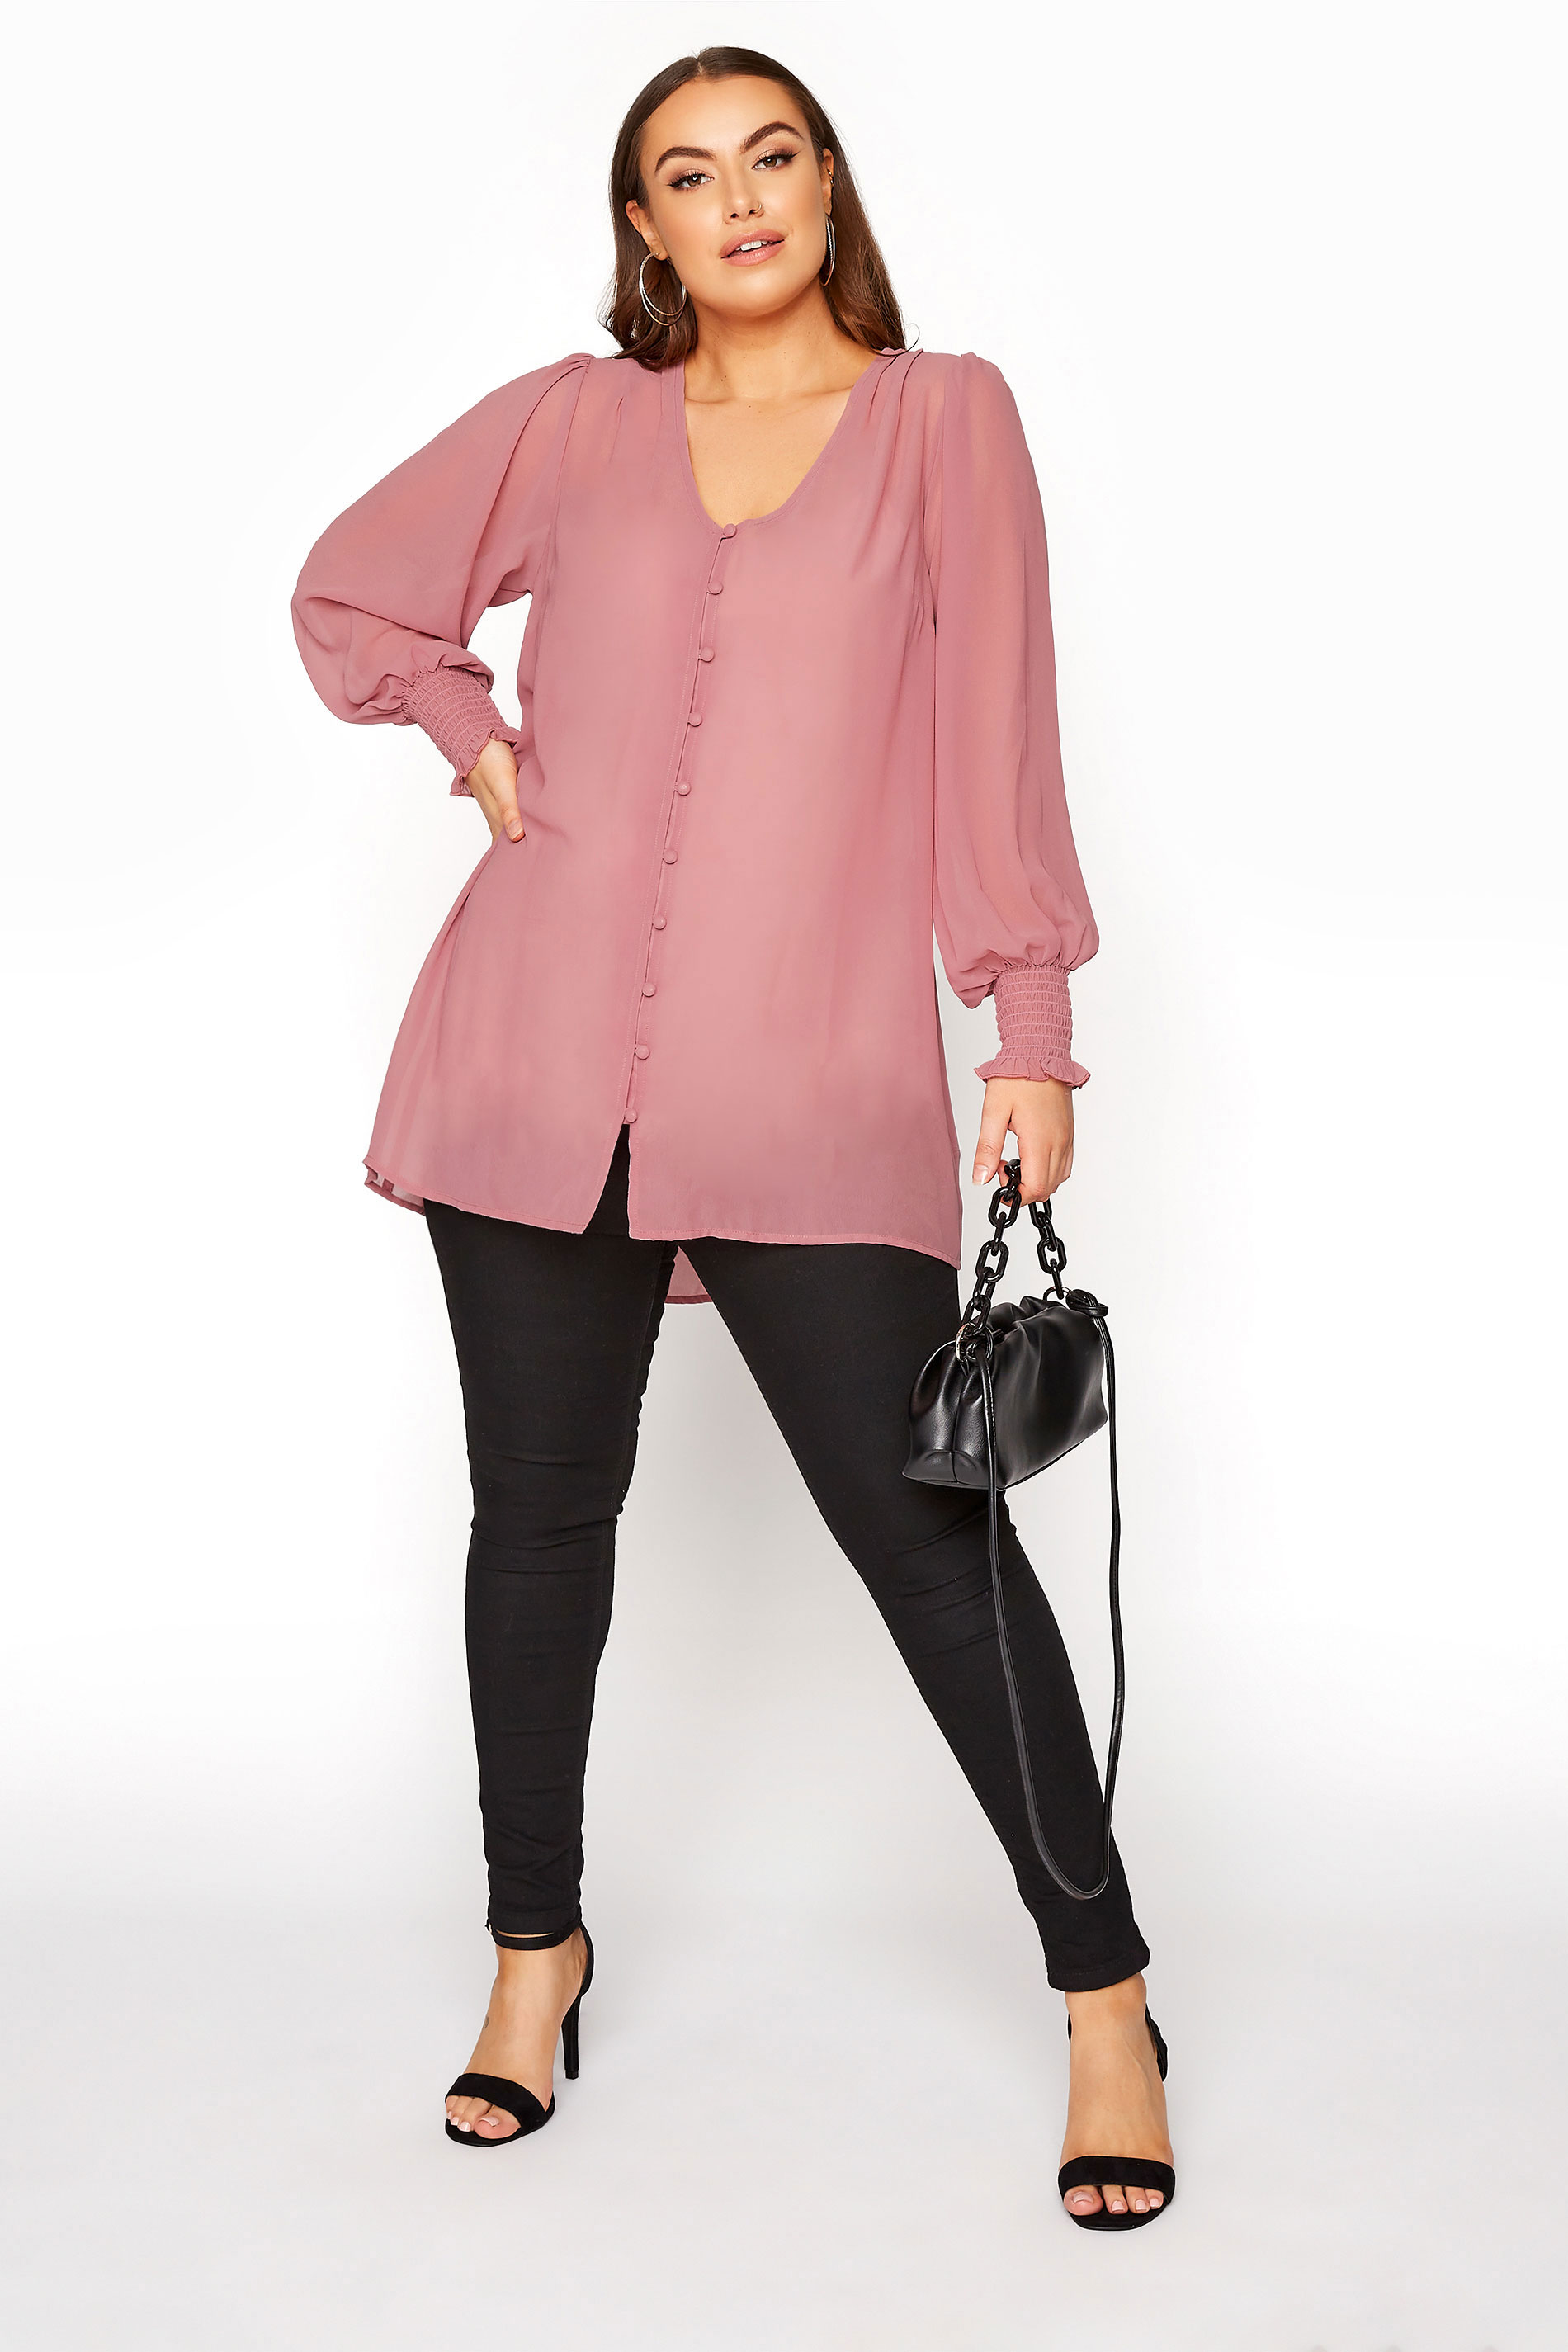 Grande taille  Tops Grande taille  Blouses & Chemisiers | YOURS LONDON - Blouse Rose Poudré Manches en Ballons - IP23548